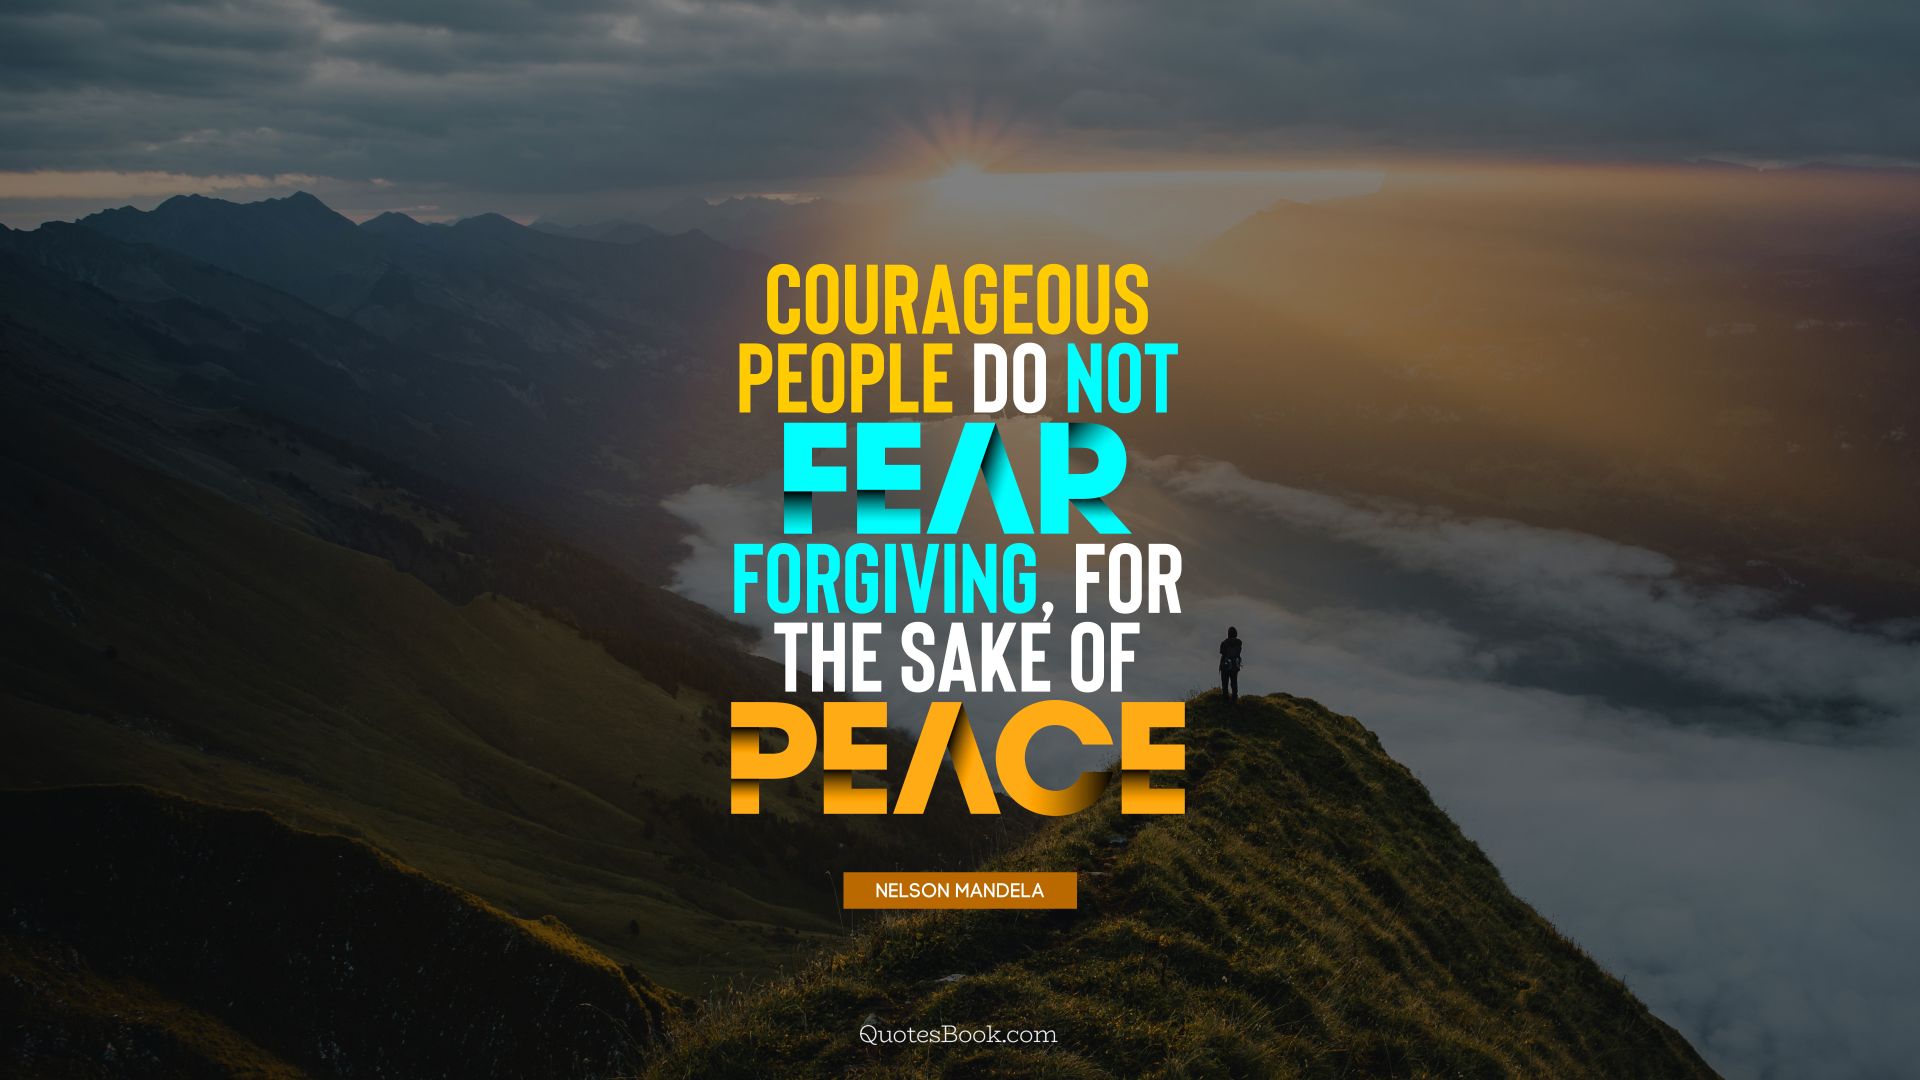 Courageous people do not fear forgiving, for the sake of peace. - Quote by Nelson Mandela